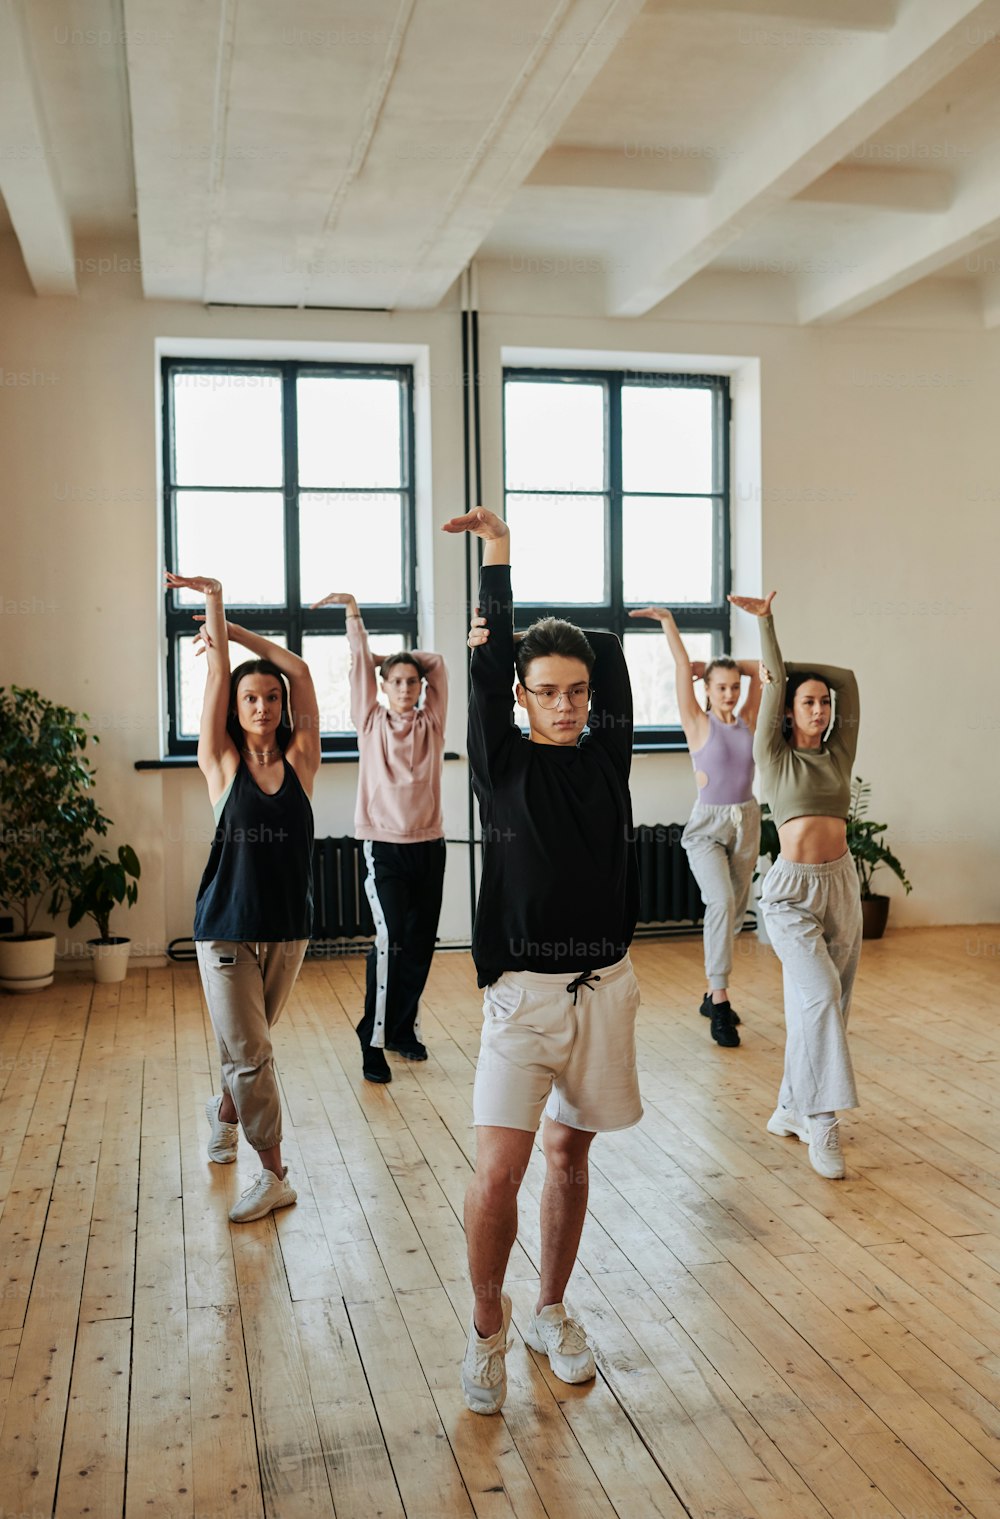 Young teenage male leader of performance group showing vogue dance exercises to group of girls and guy during training in studio